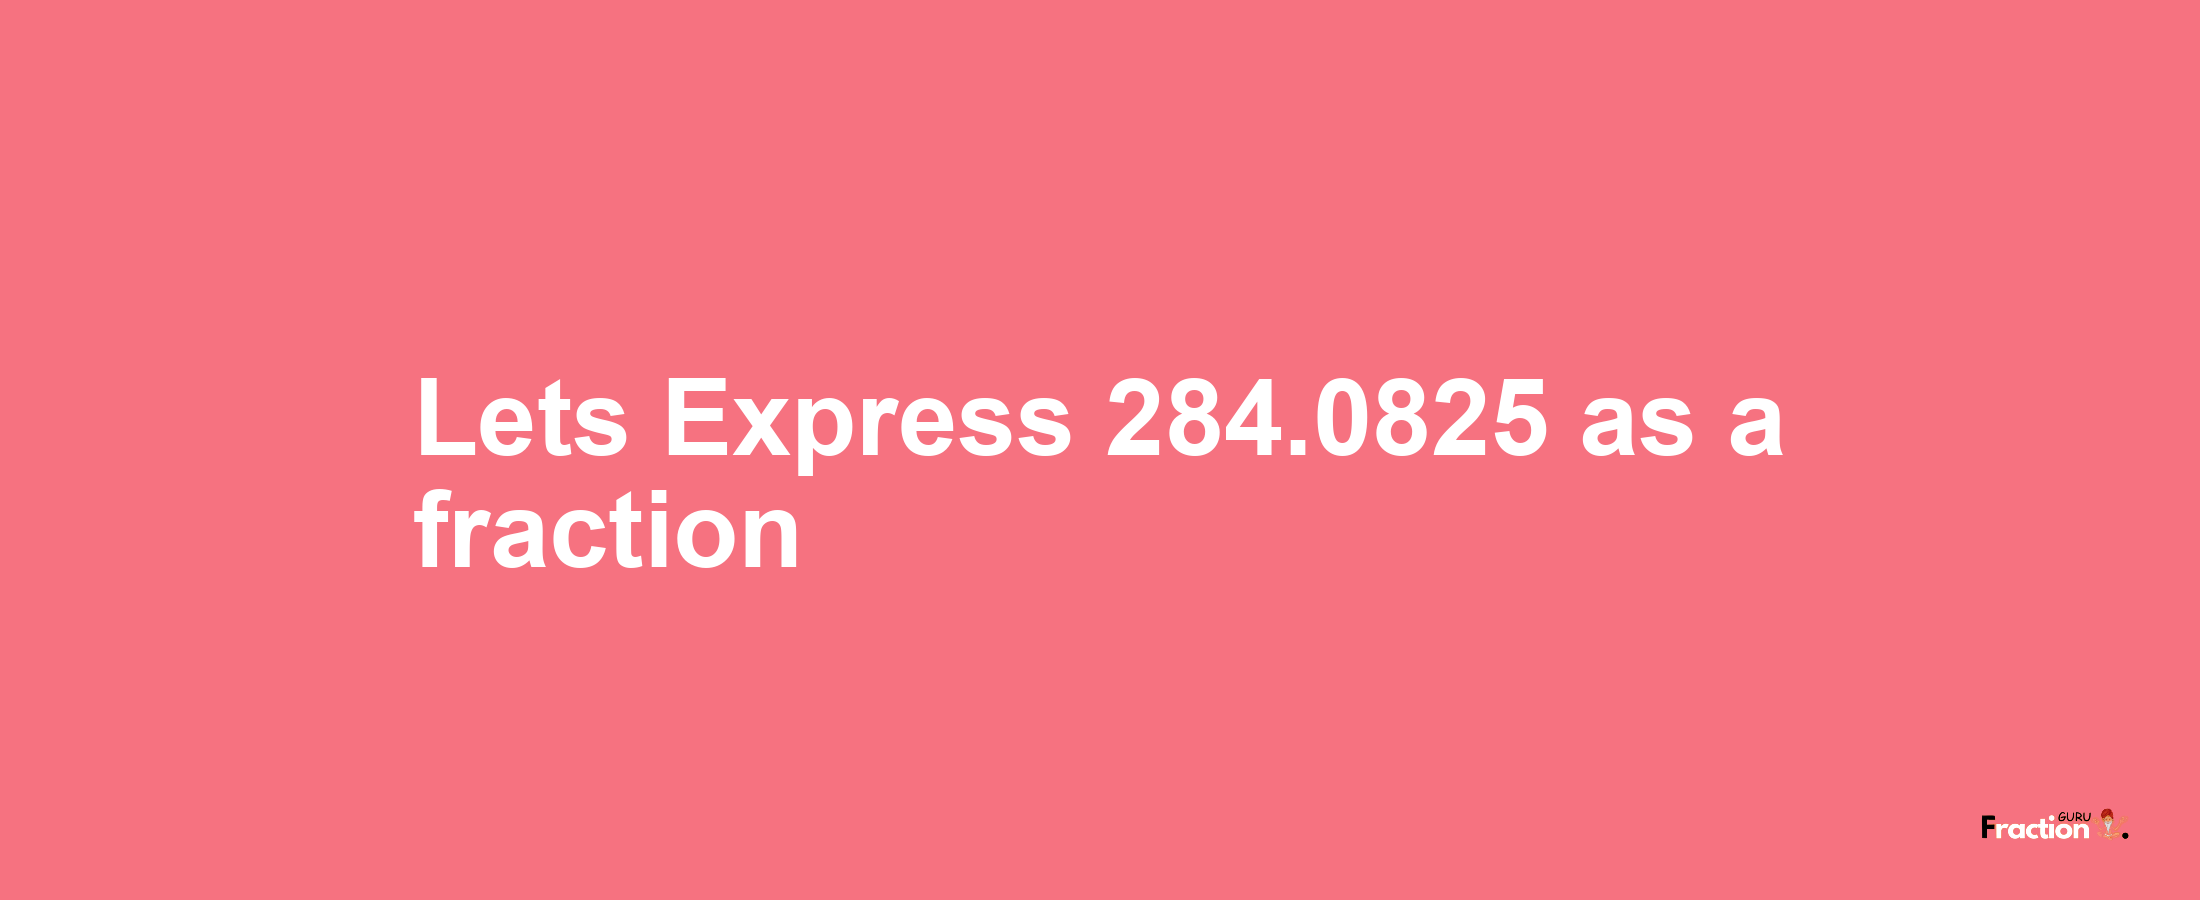 Lets Express 284.0825 as afraction